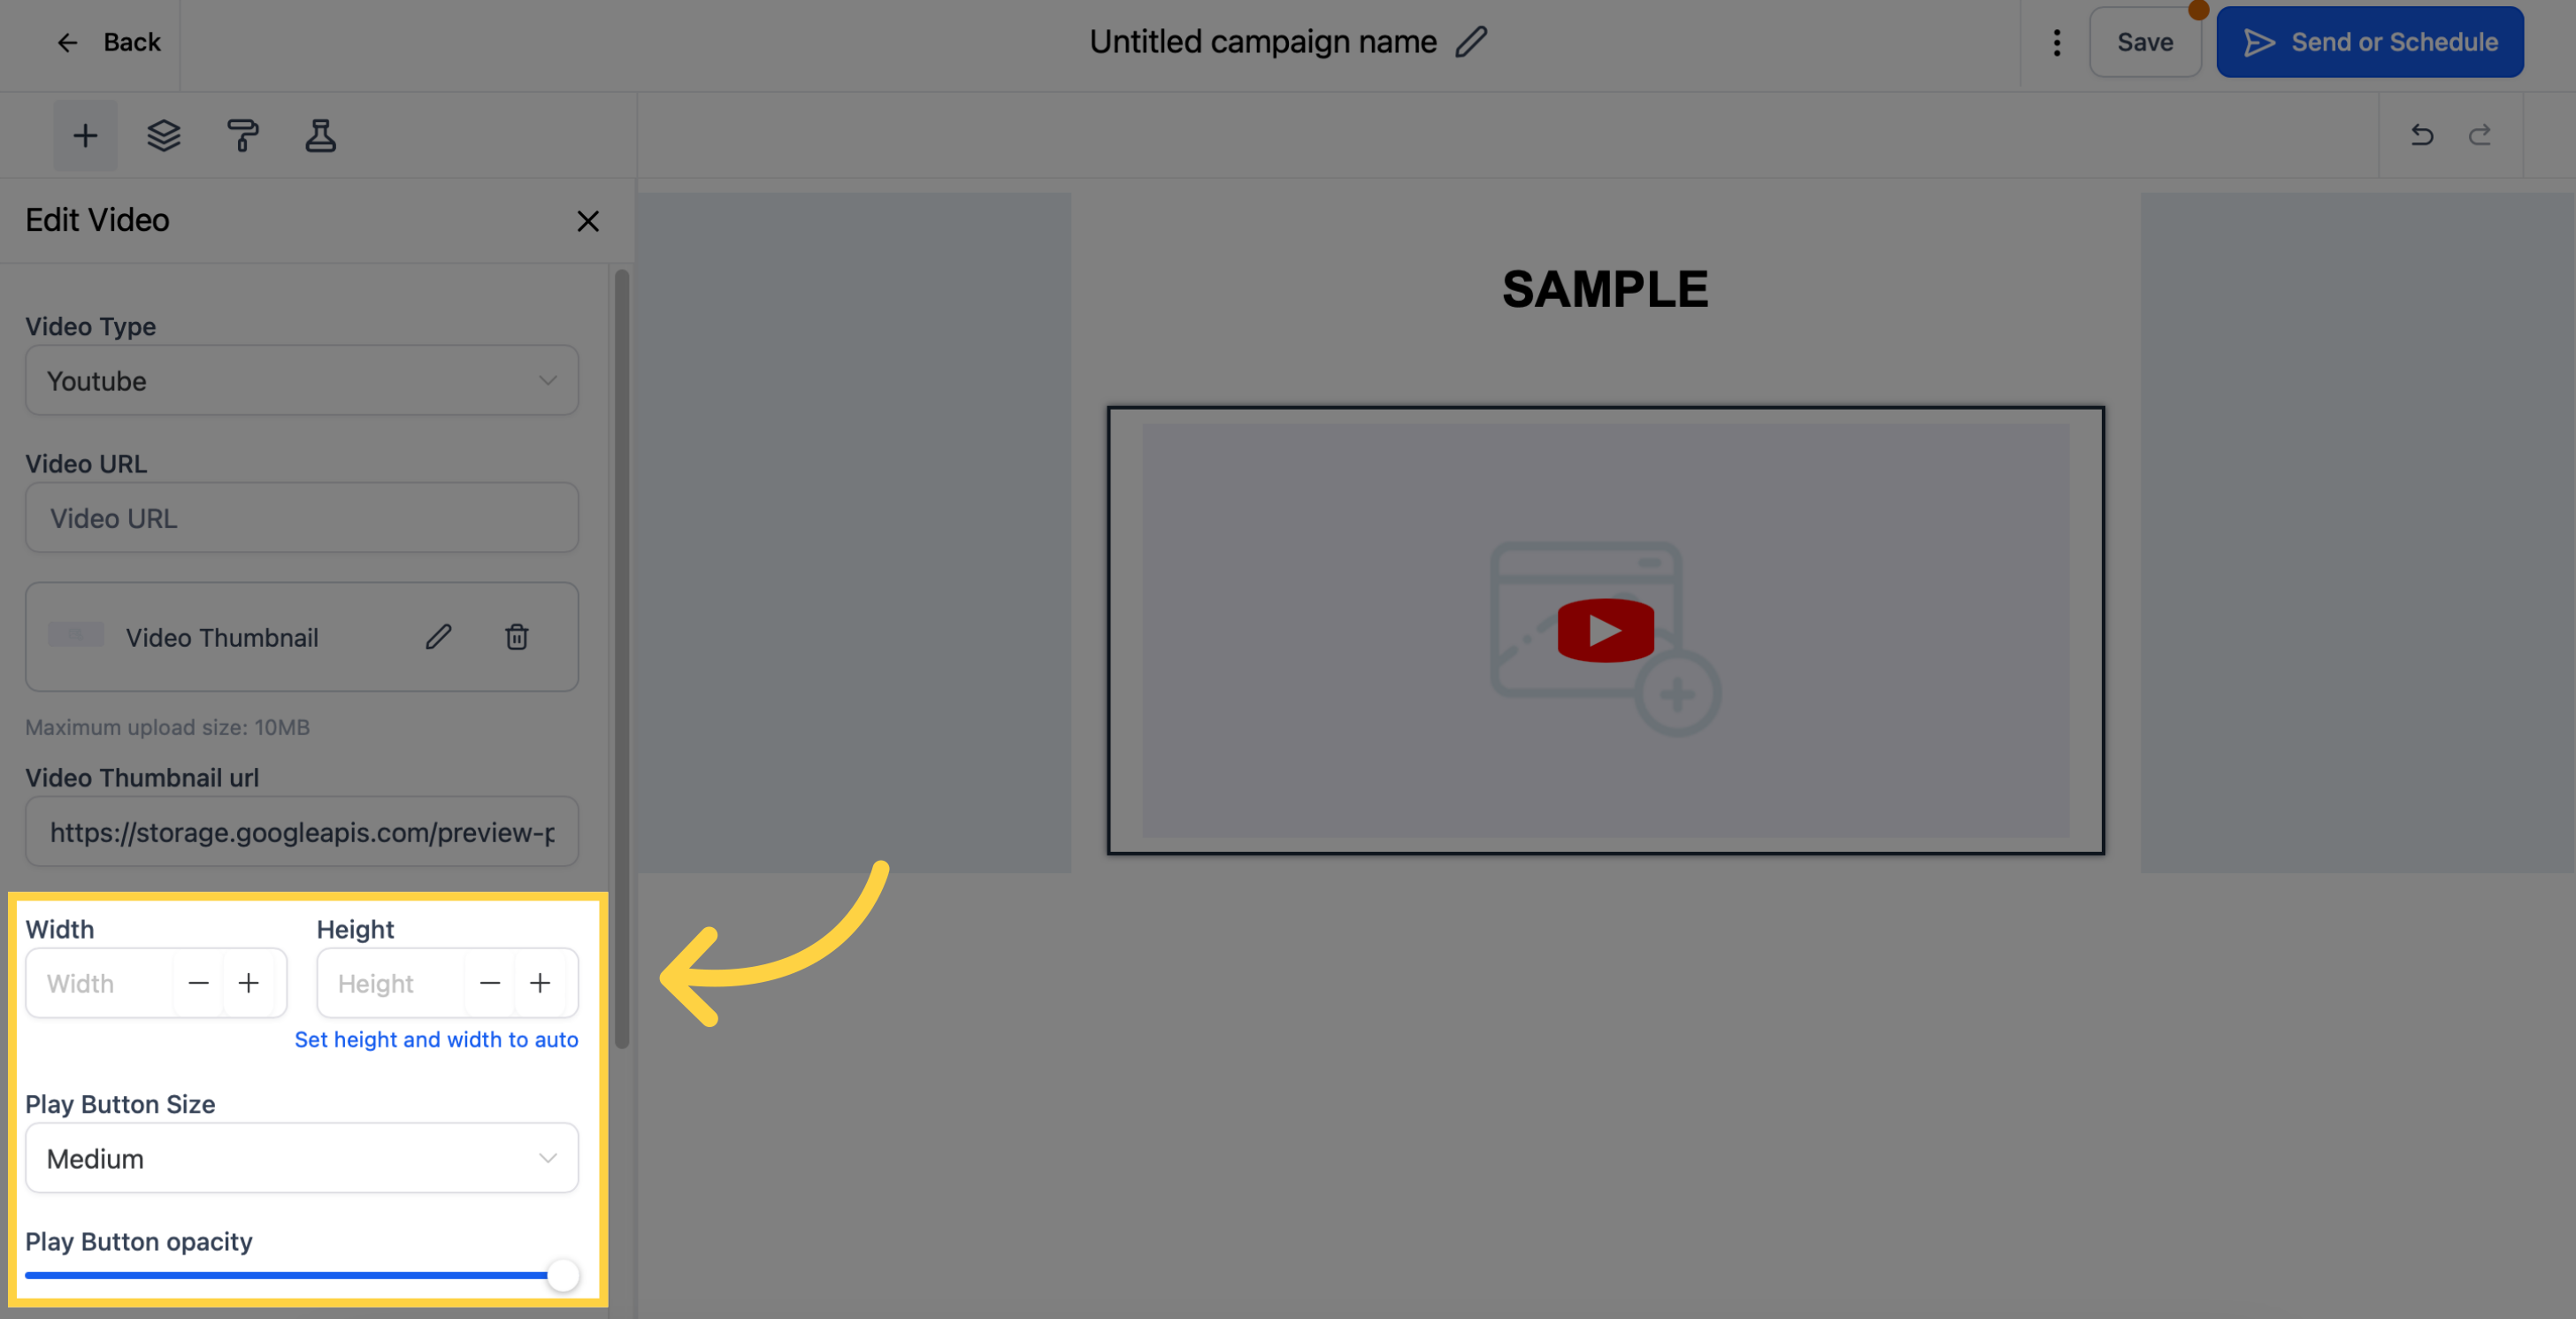 Customize width, height and play button